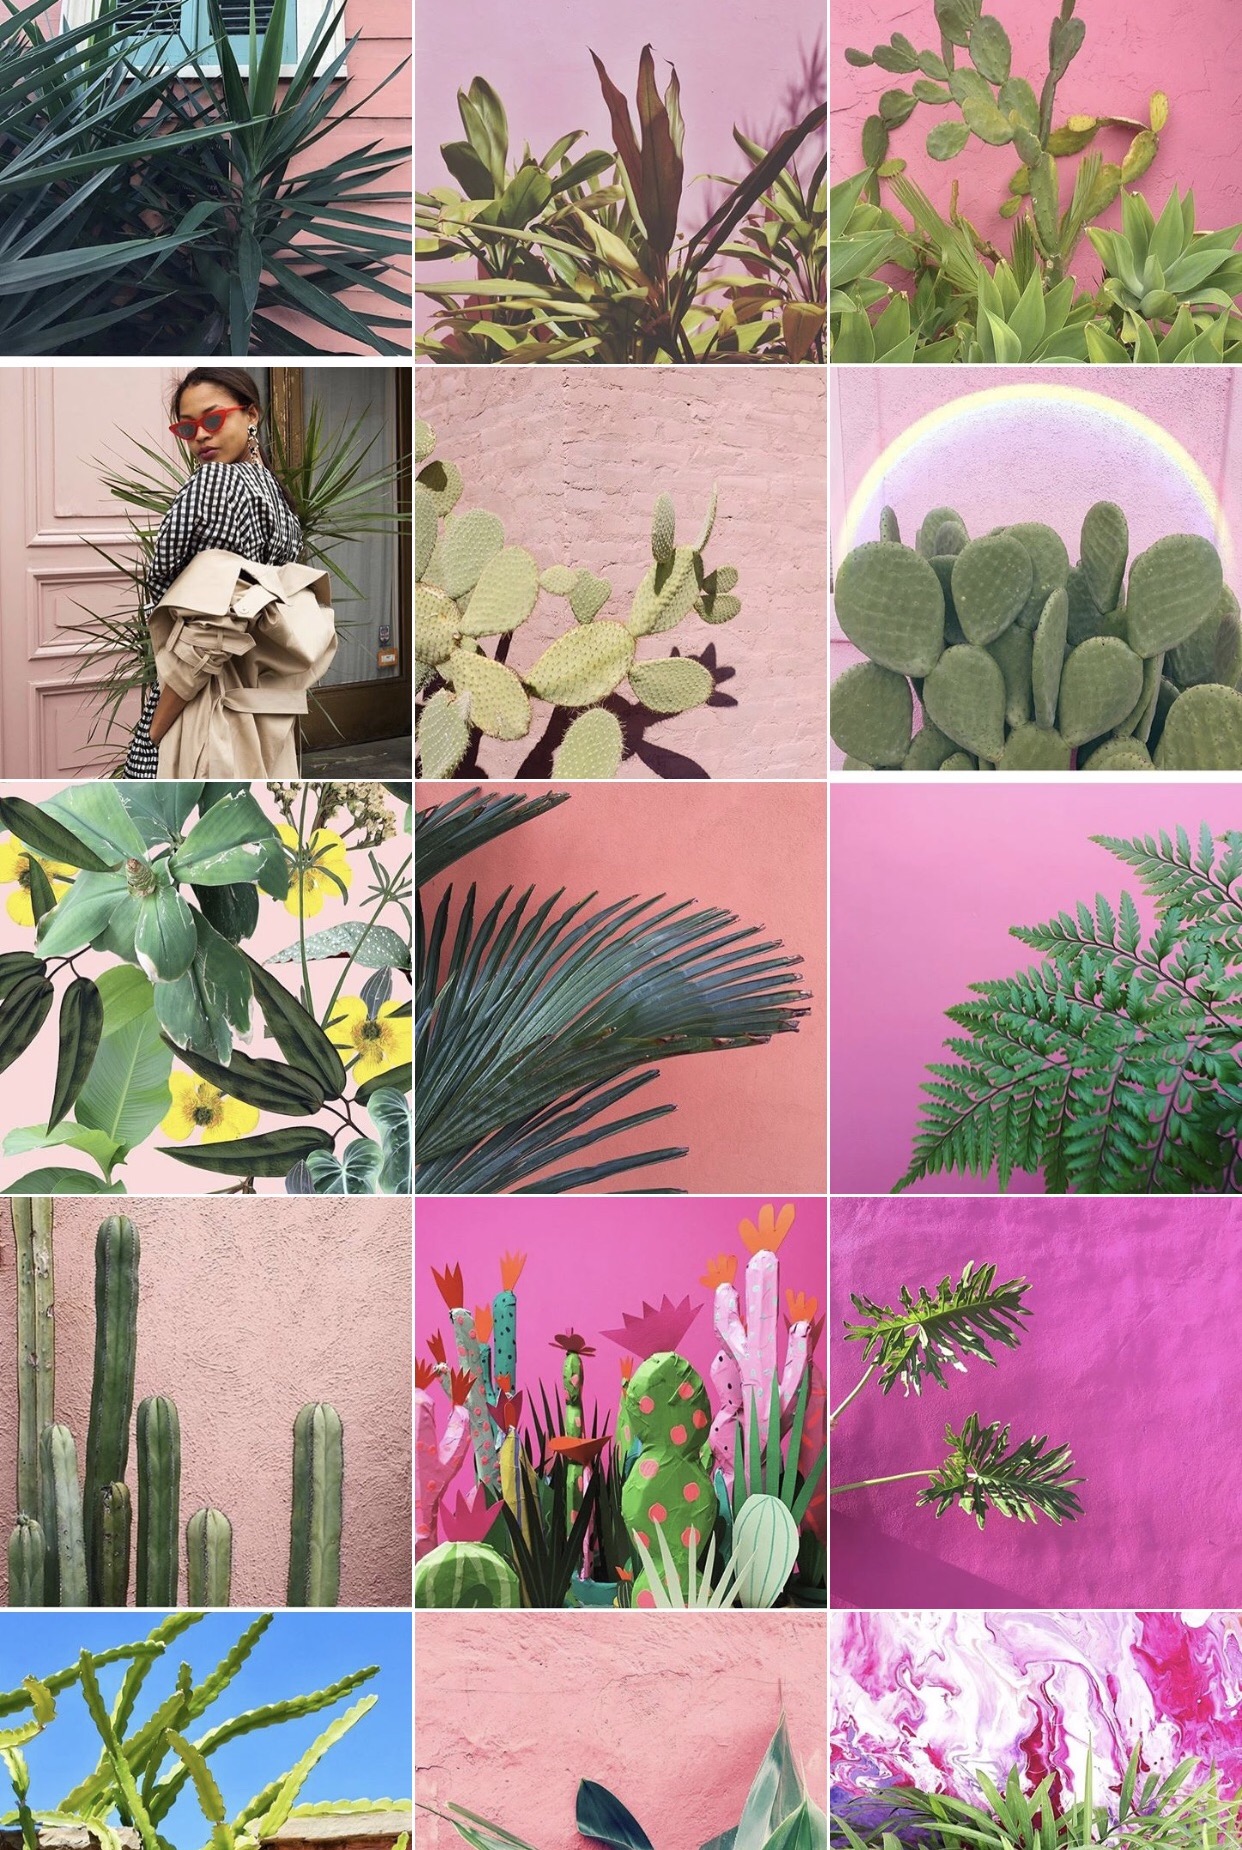 @plantsonpink inspo for the TNT Scarf